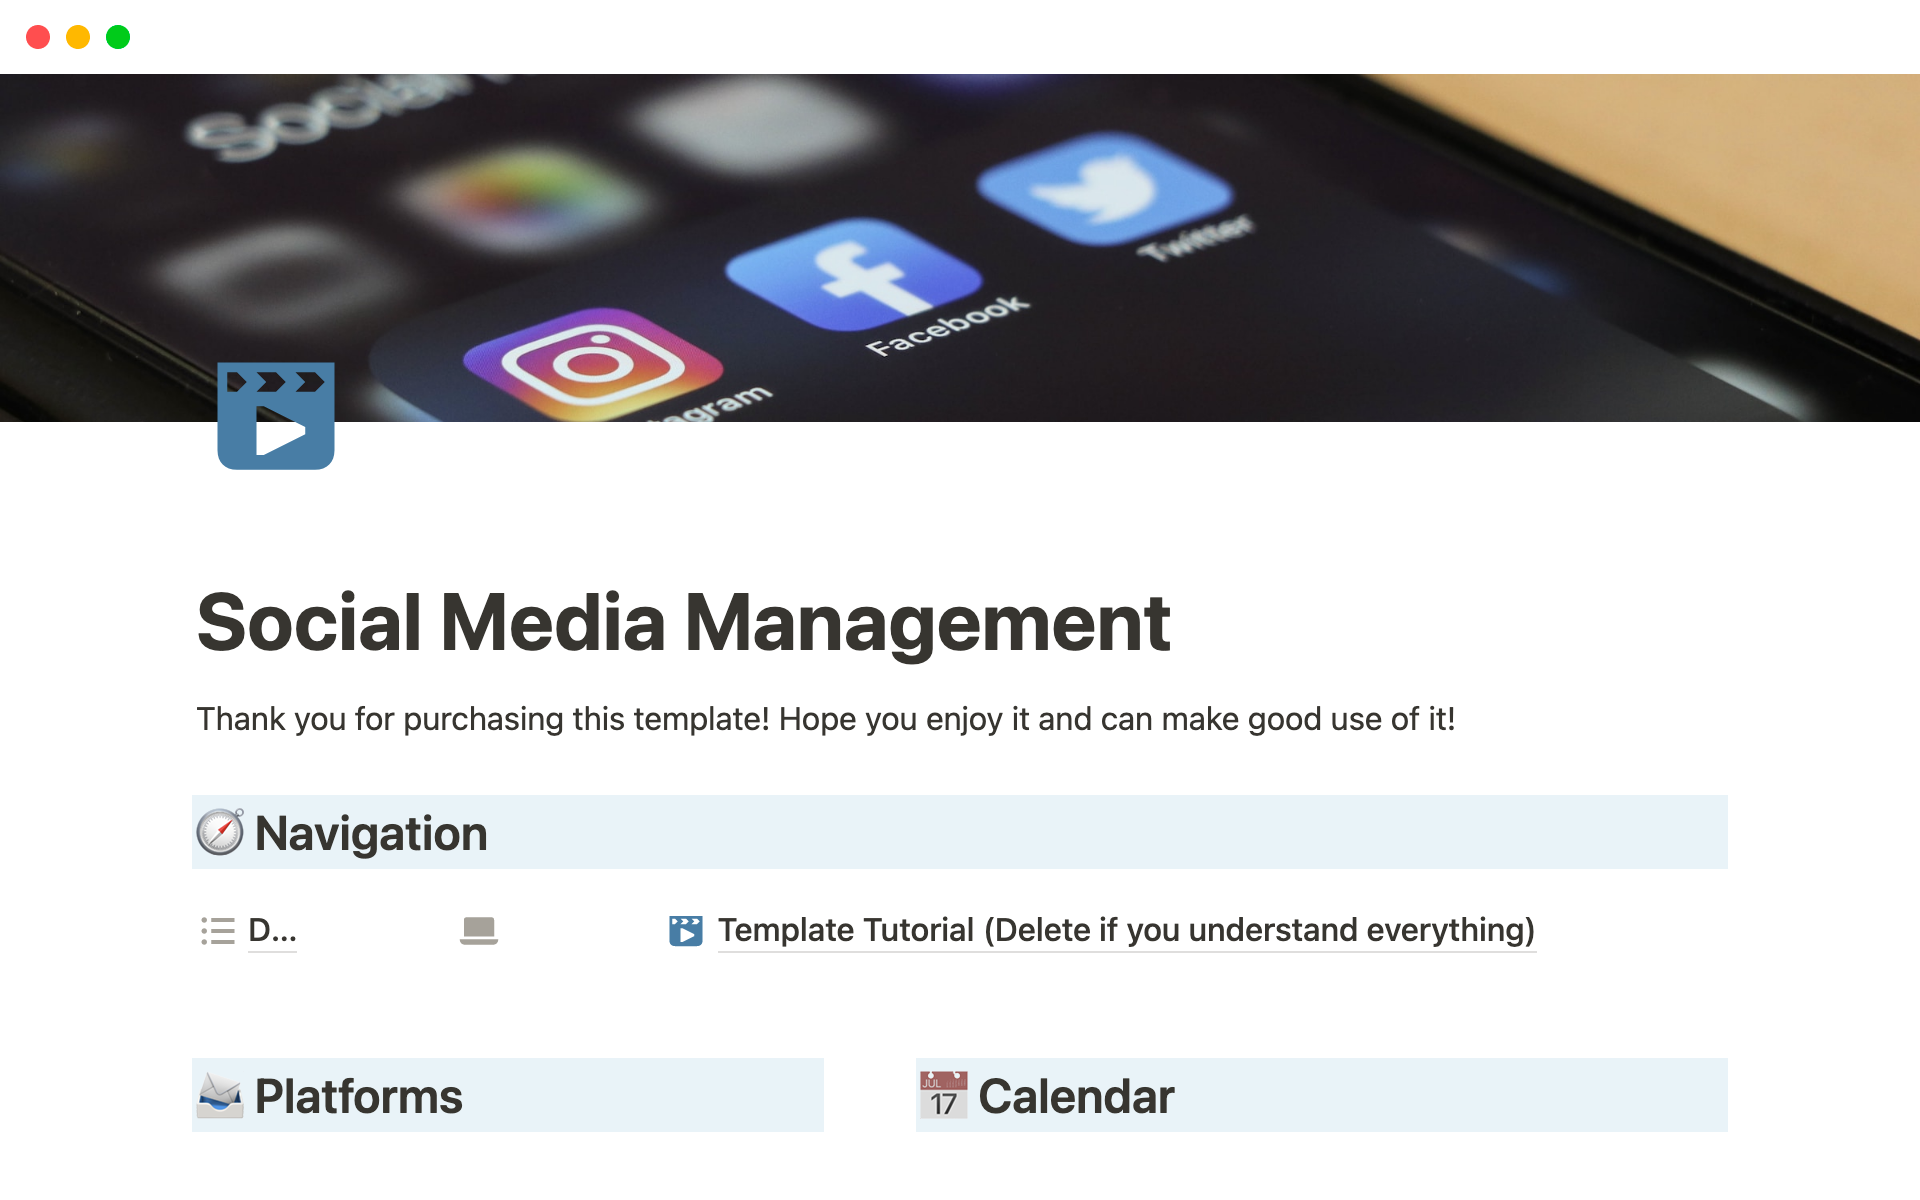 Simplifies social media planning and scheduling for all platforms, with content creation tools and an easy-to-use note-taking system.